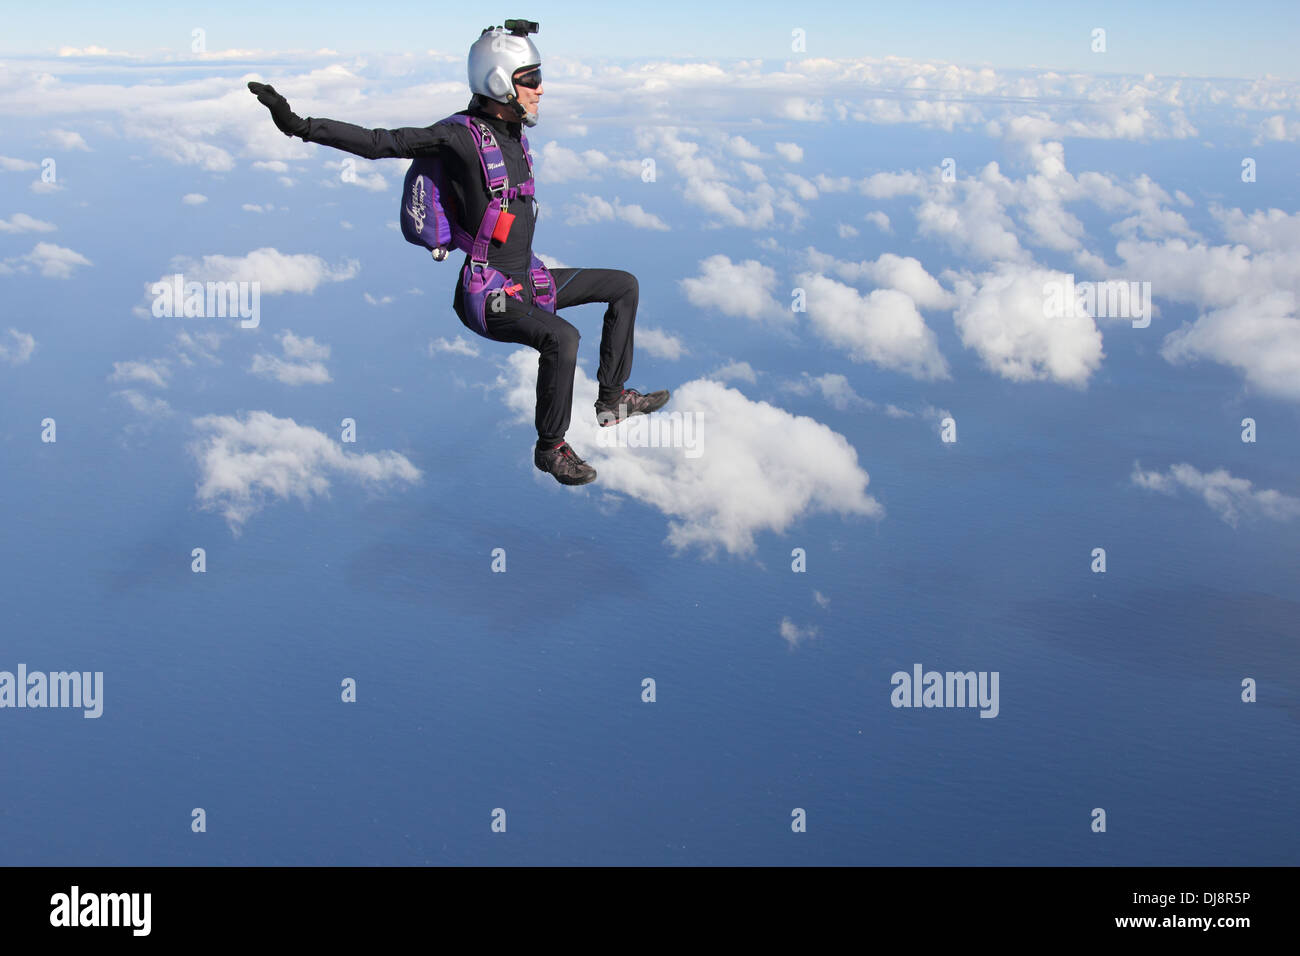 This skydiver has a video camera mounted on his helmet and is filming another jumper in the sky over clouds. Stock Photo